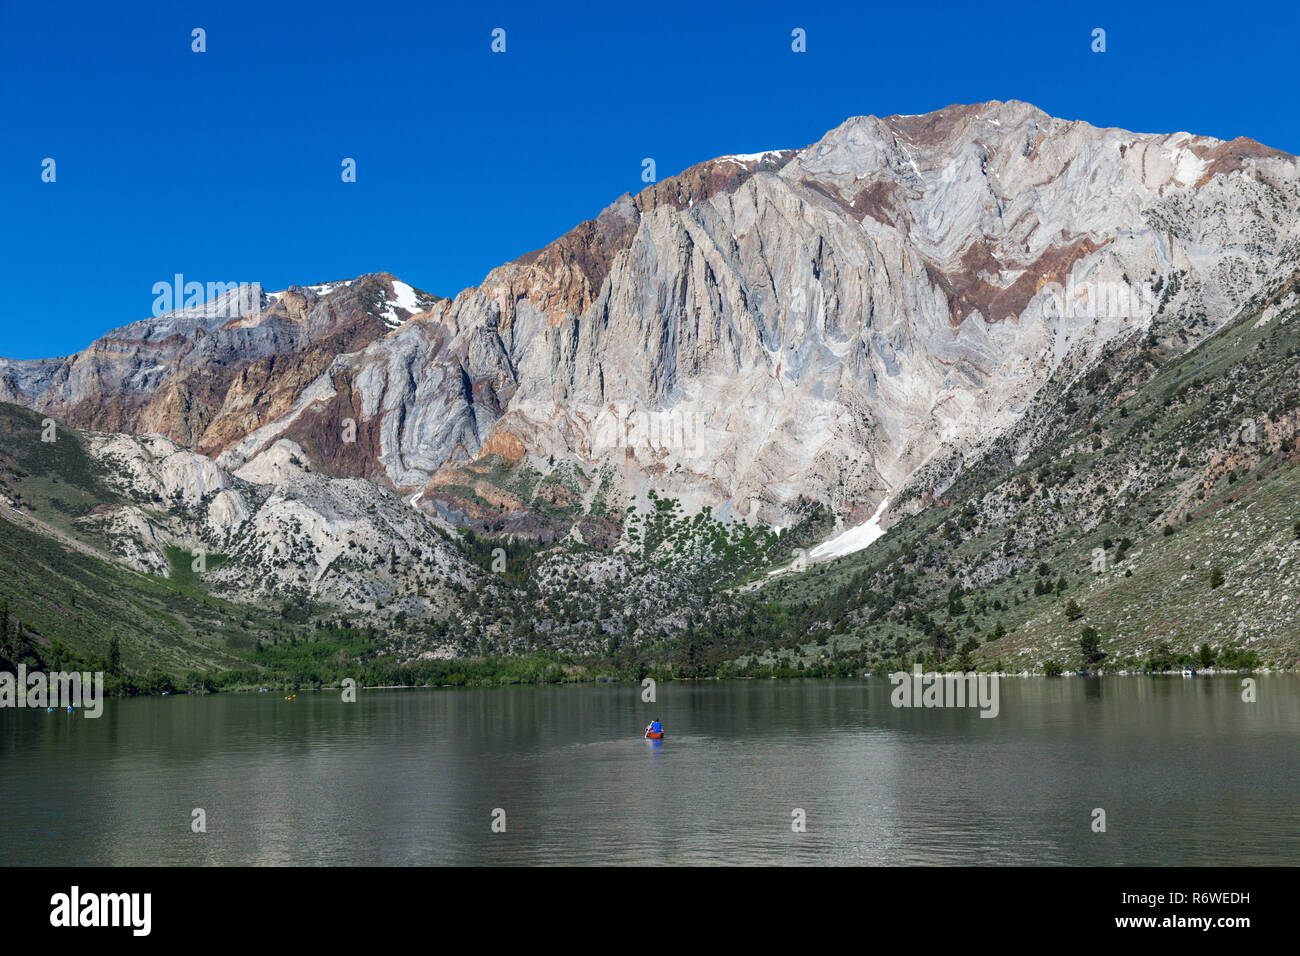 Convict Lake in Mammoth Lakes Area USA. Mammoth Lakes is a town in California's Sierra Nevada mountains. It's known for the Mammoth Mountain and June  Stock Photo